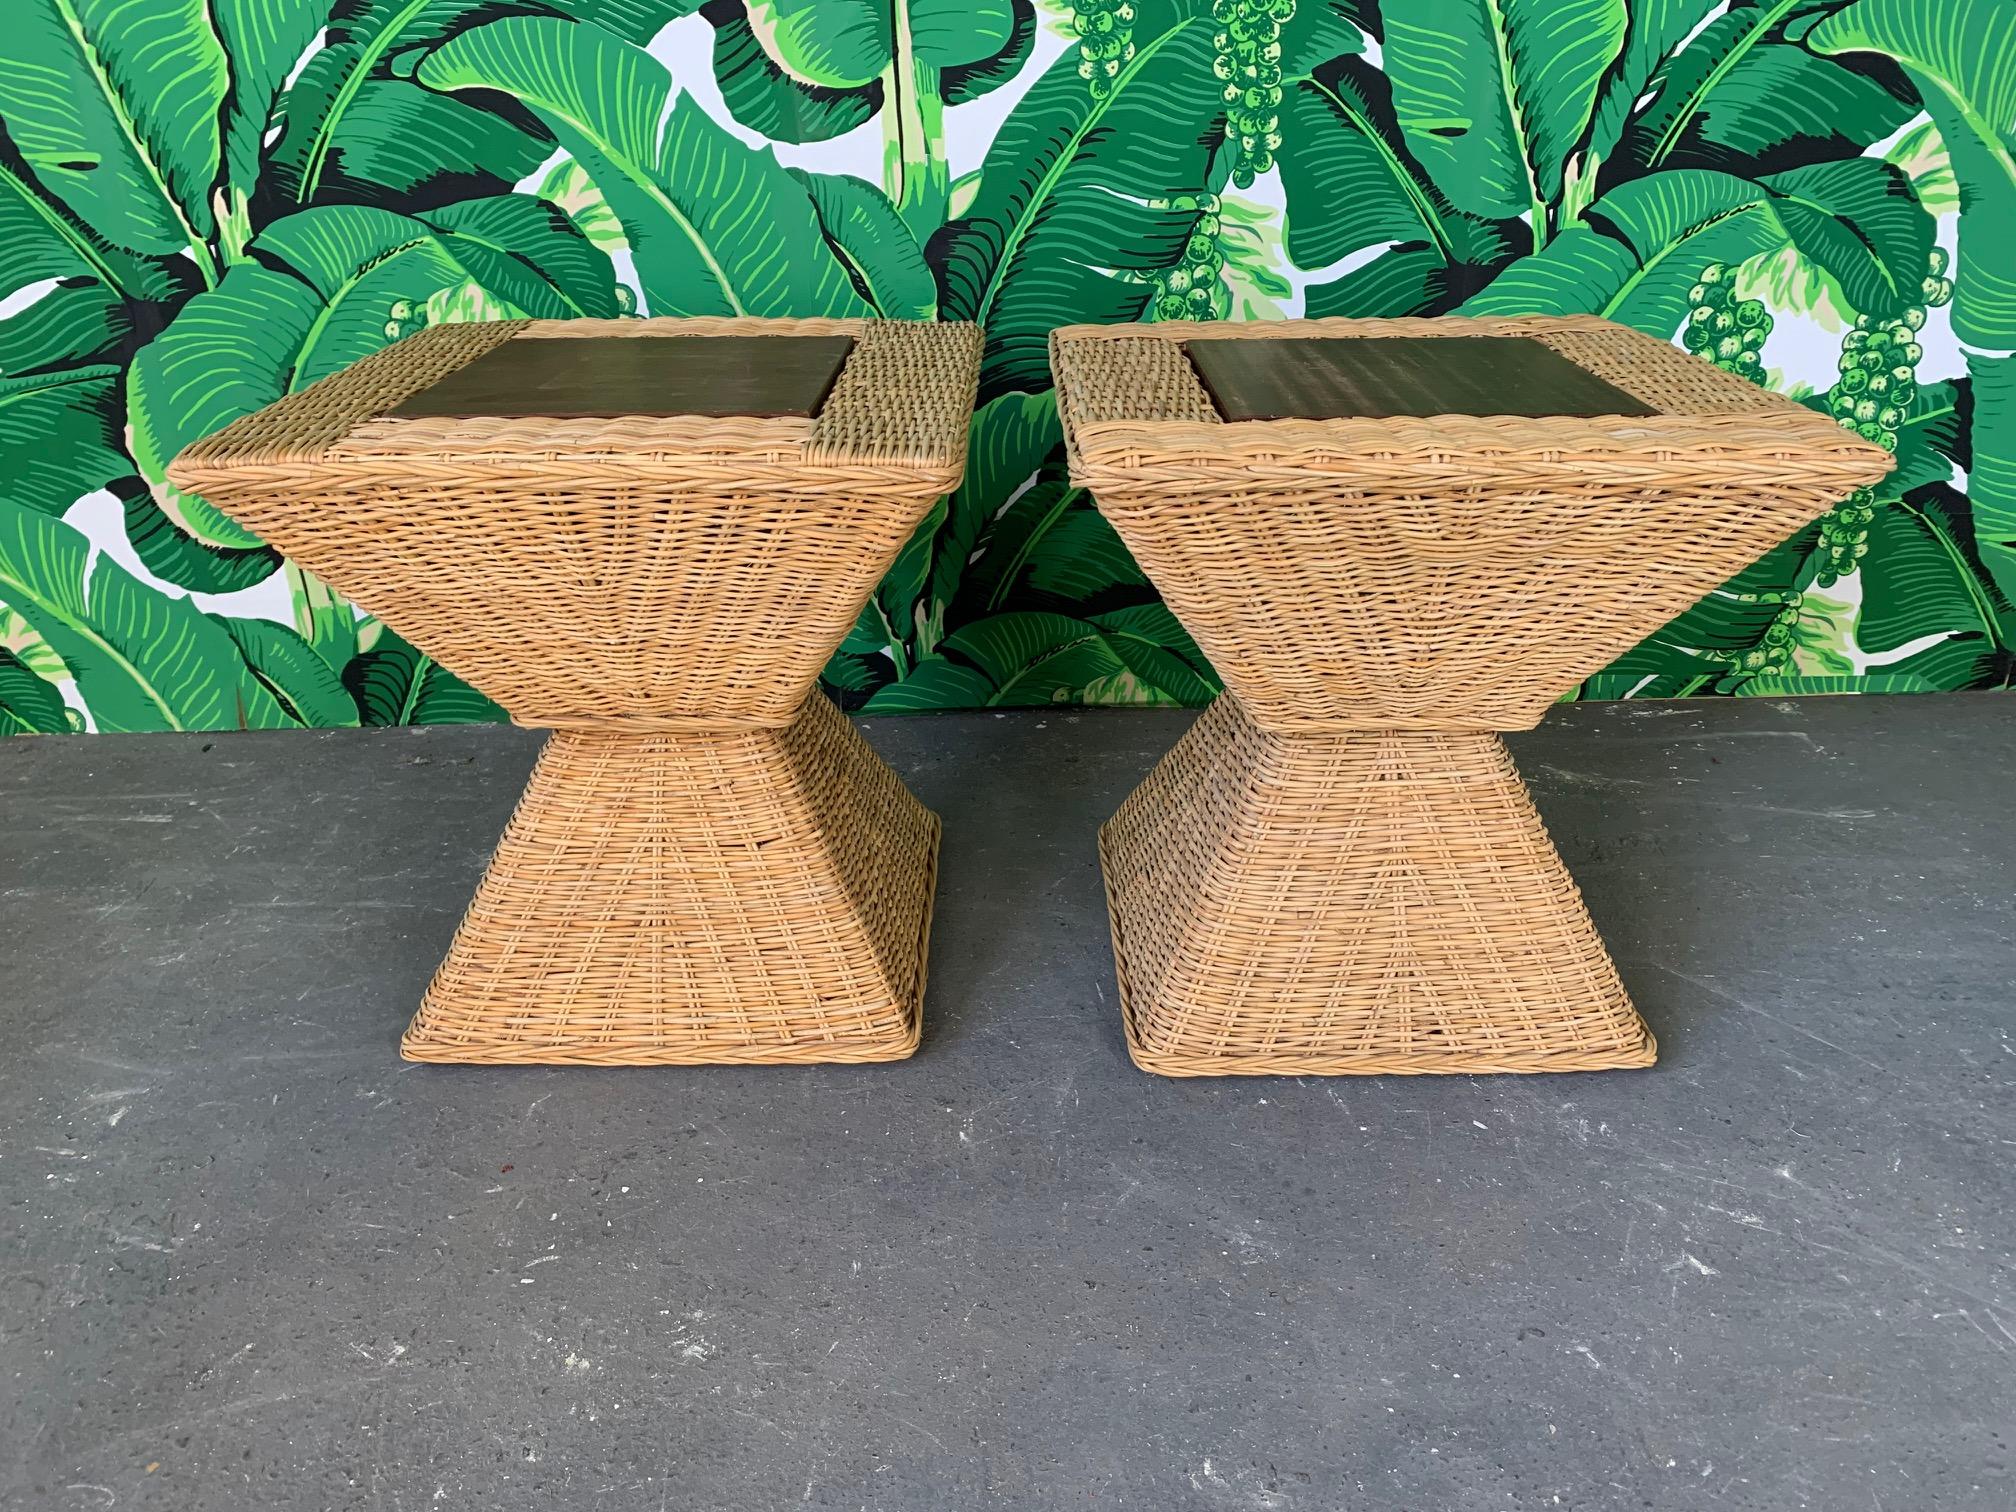 Pair of side tables feature wood frame wrapped in tightly woven wicker with dark stained solid wood tops. Tops can opened for storage space within. Very good vintage condition with minor imperfections consistent with age.